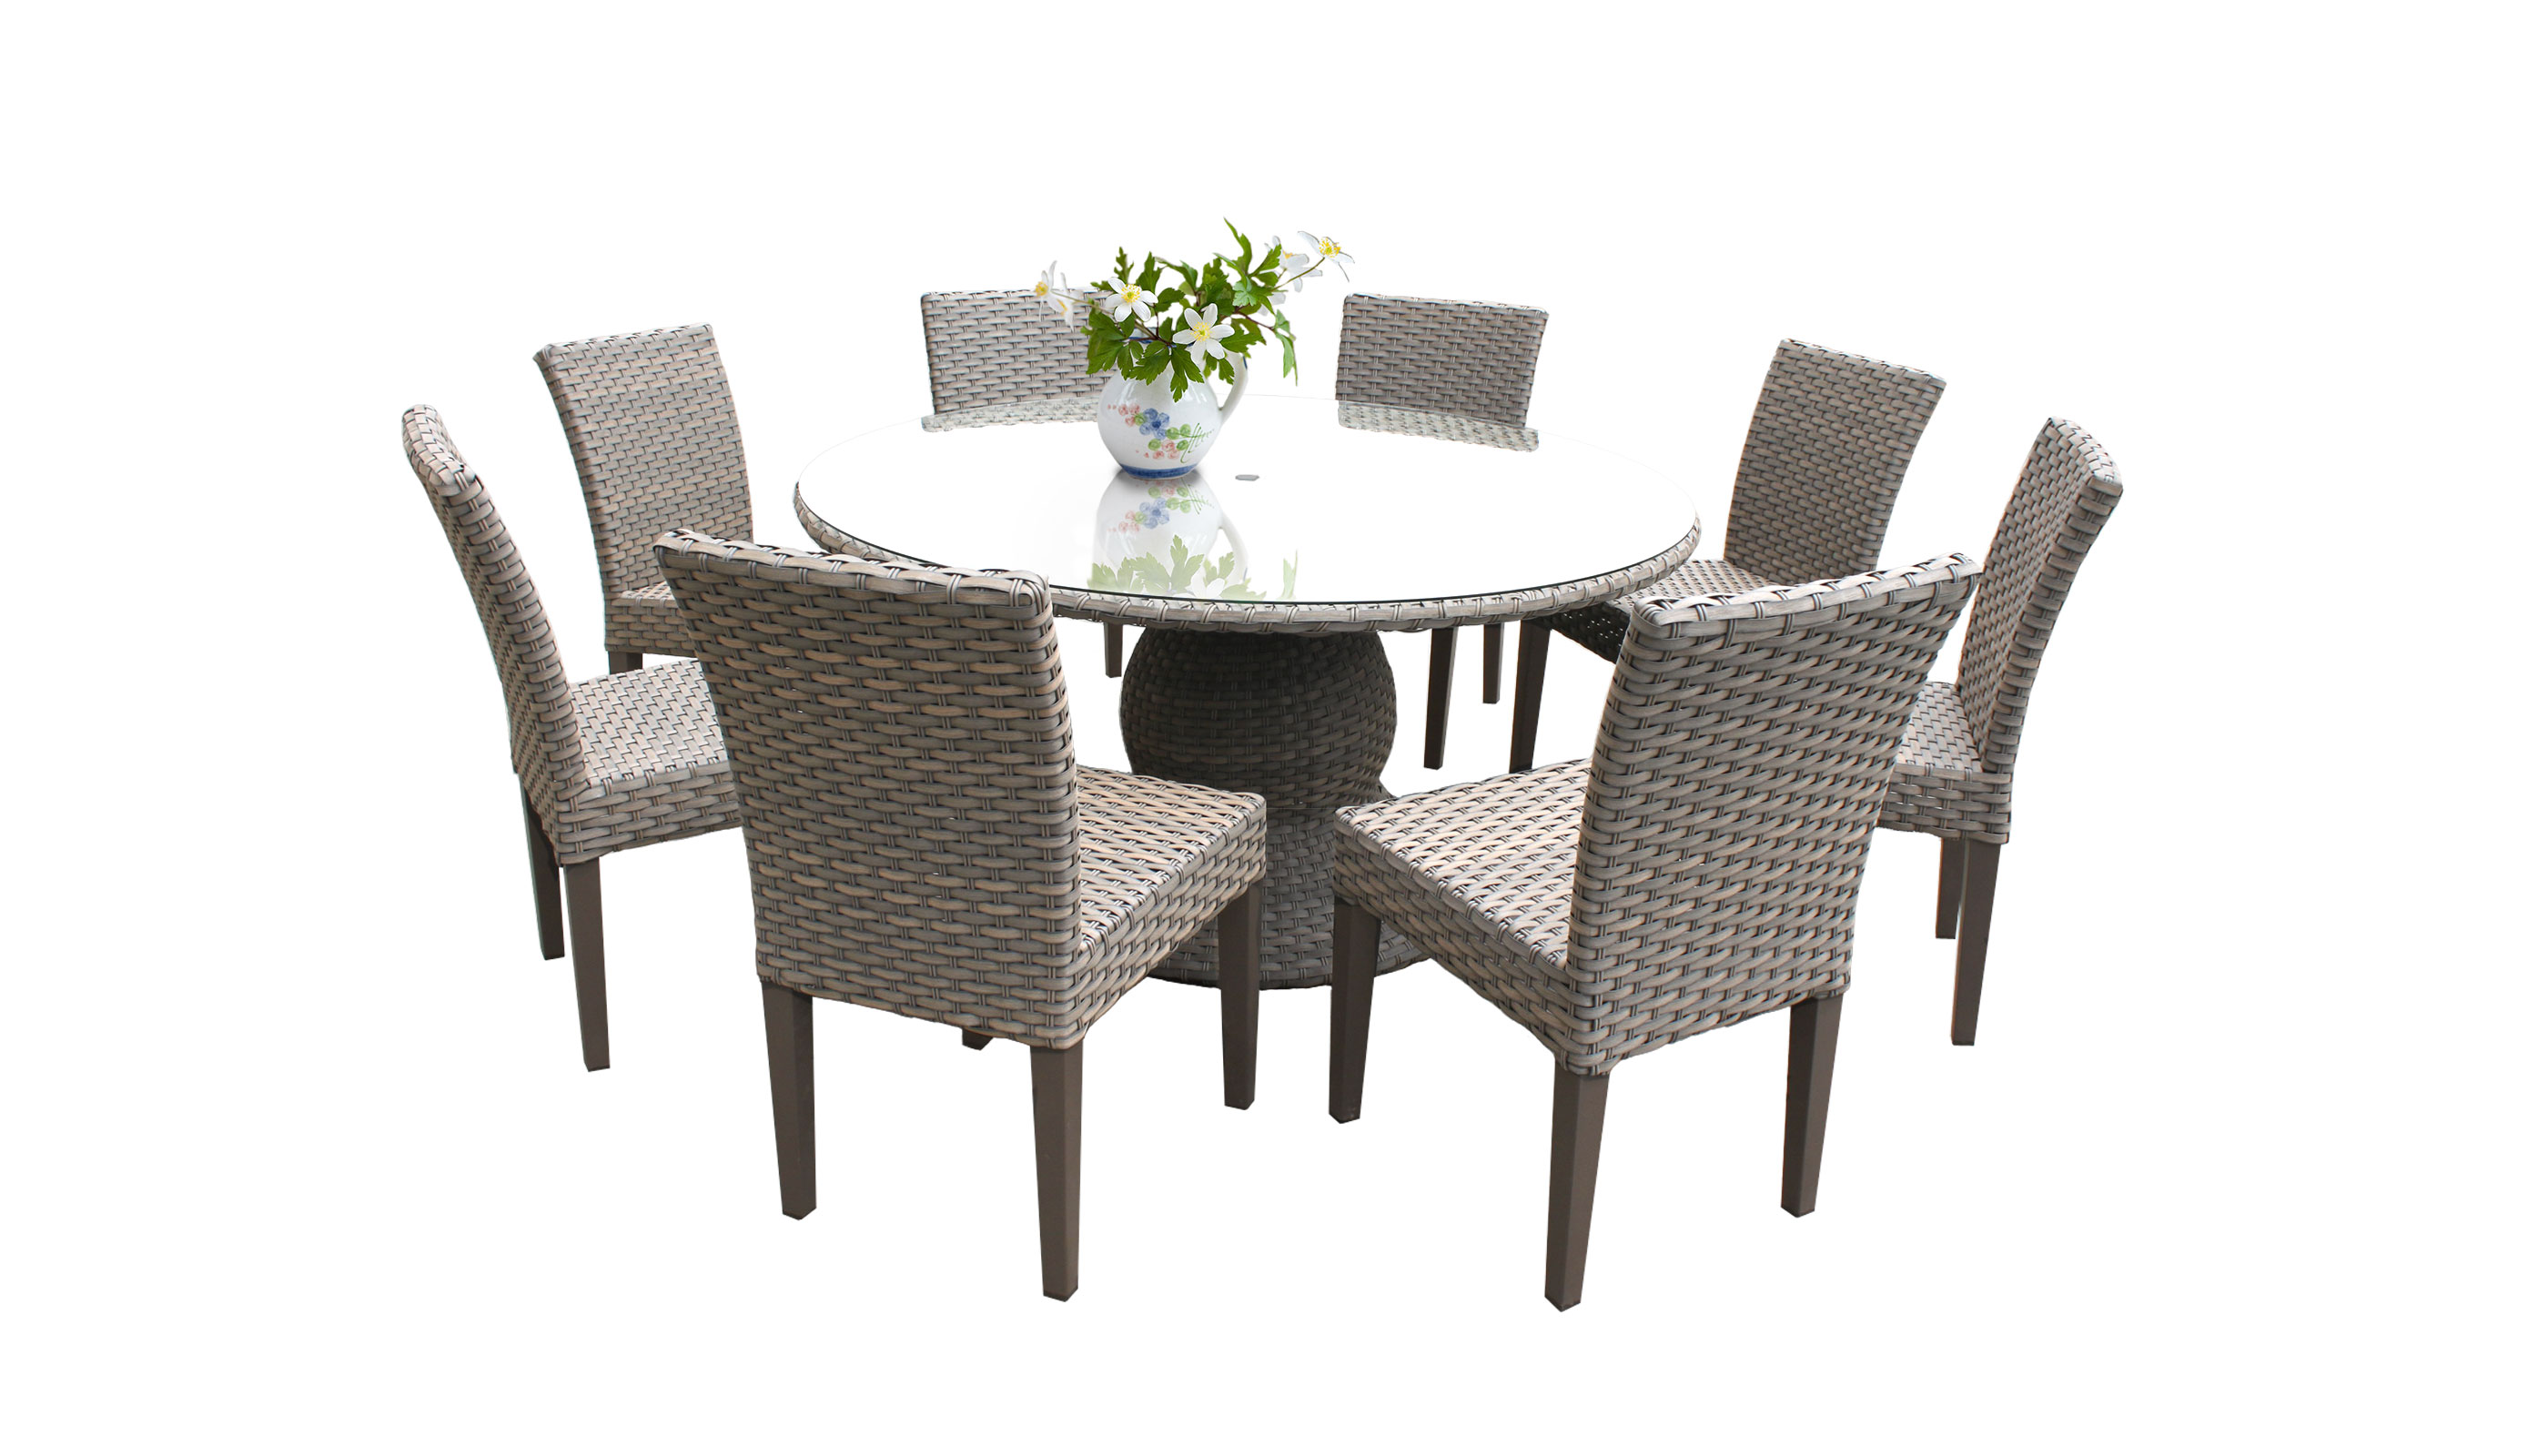 Monterey 60 Inch Outdoor Patio Dining Table with 8 Armless Chairs